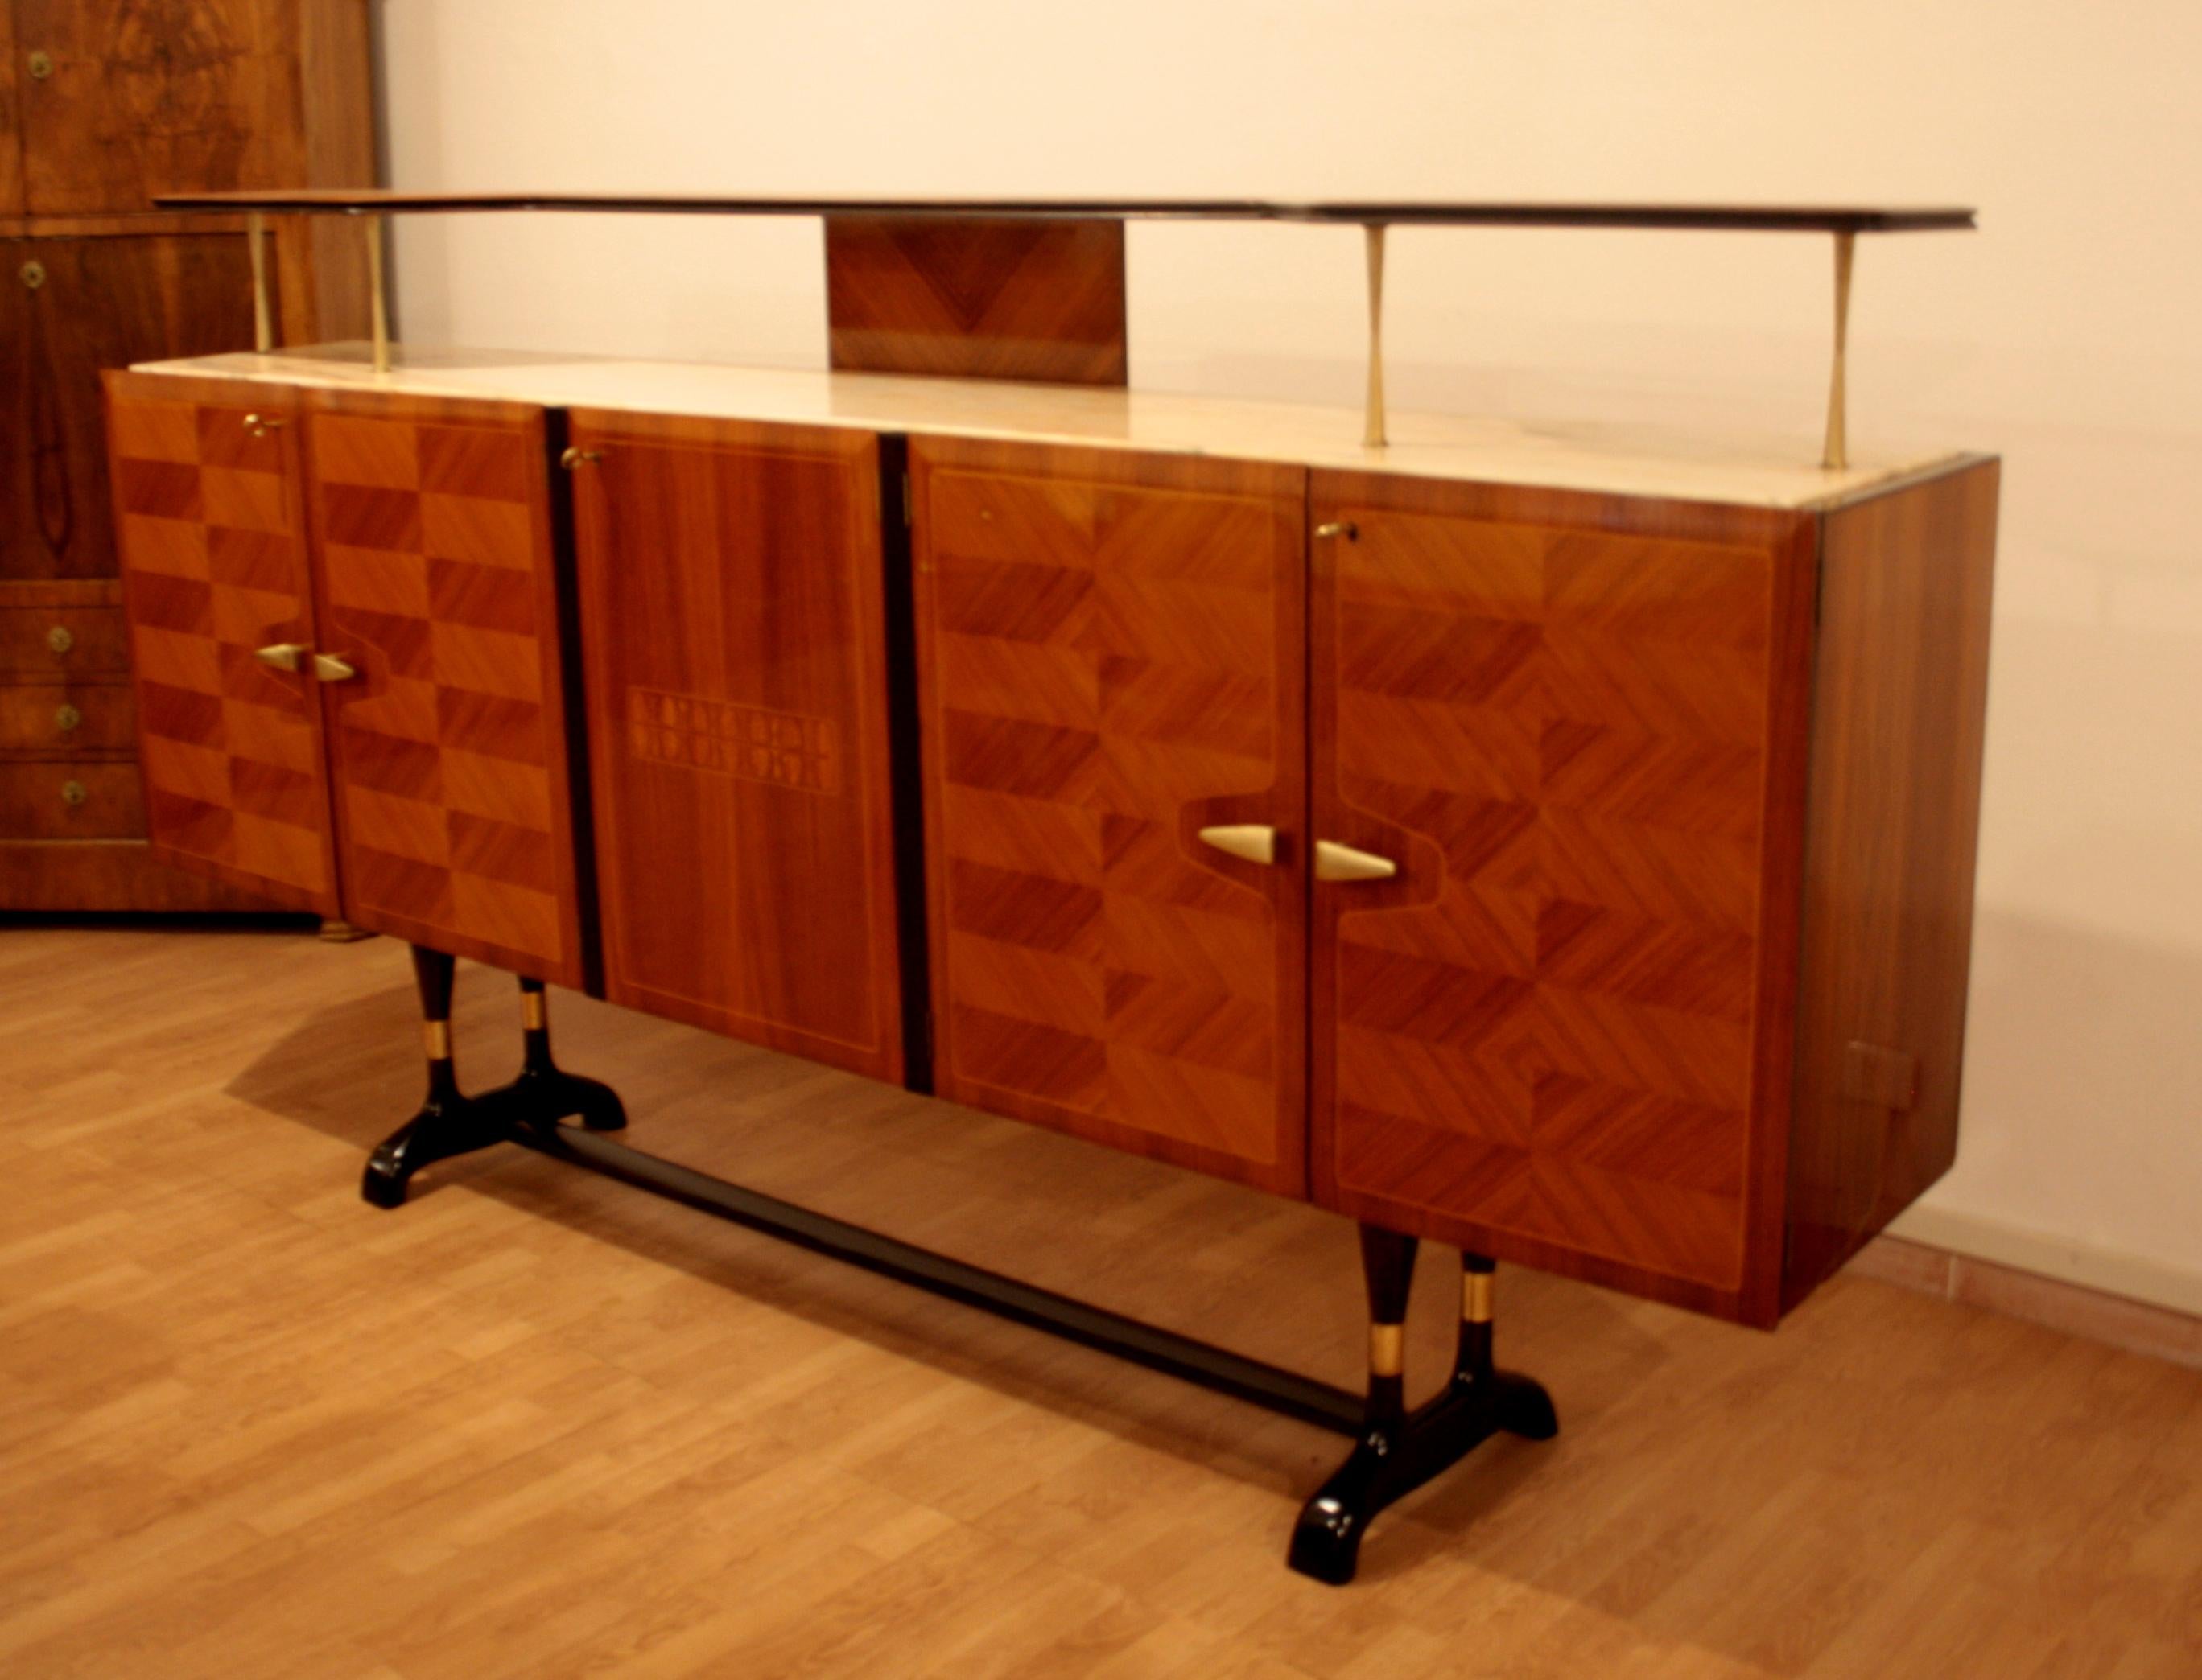 Vittorio Dassi mobile bar sideboard

Very rare and refined Italian mobile bar sideboard designed by Vittorio Dassi in the 1950s, with the Cecchini manufacturing brand, Italian carpentry with offices in Lissone Seregno and Cantù.

Made with precious